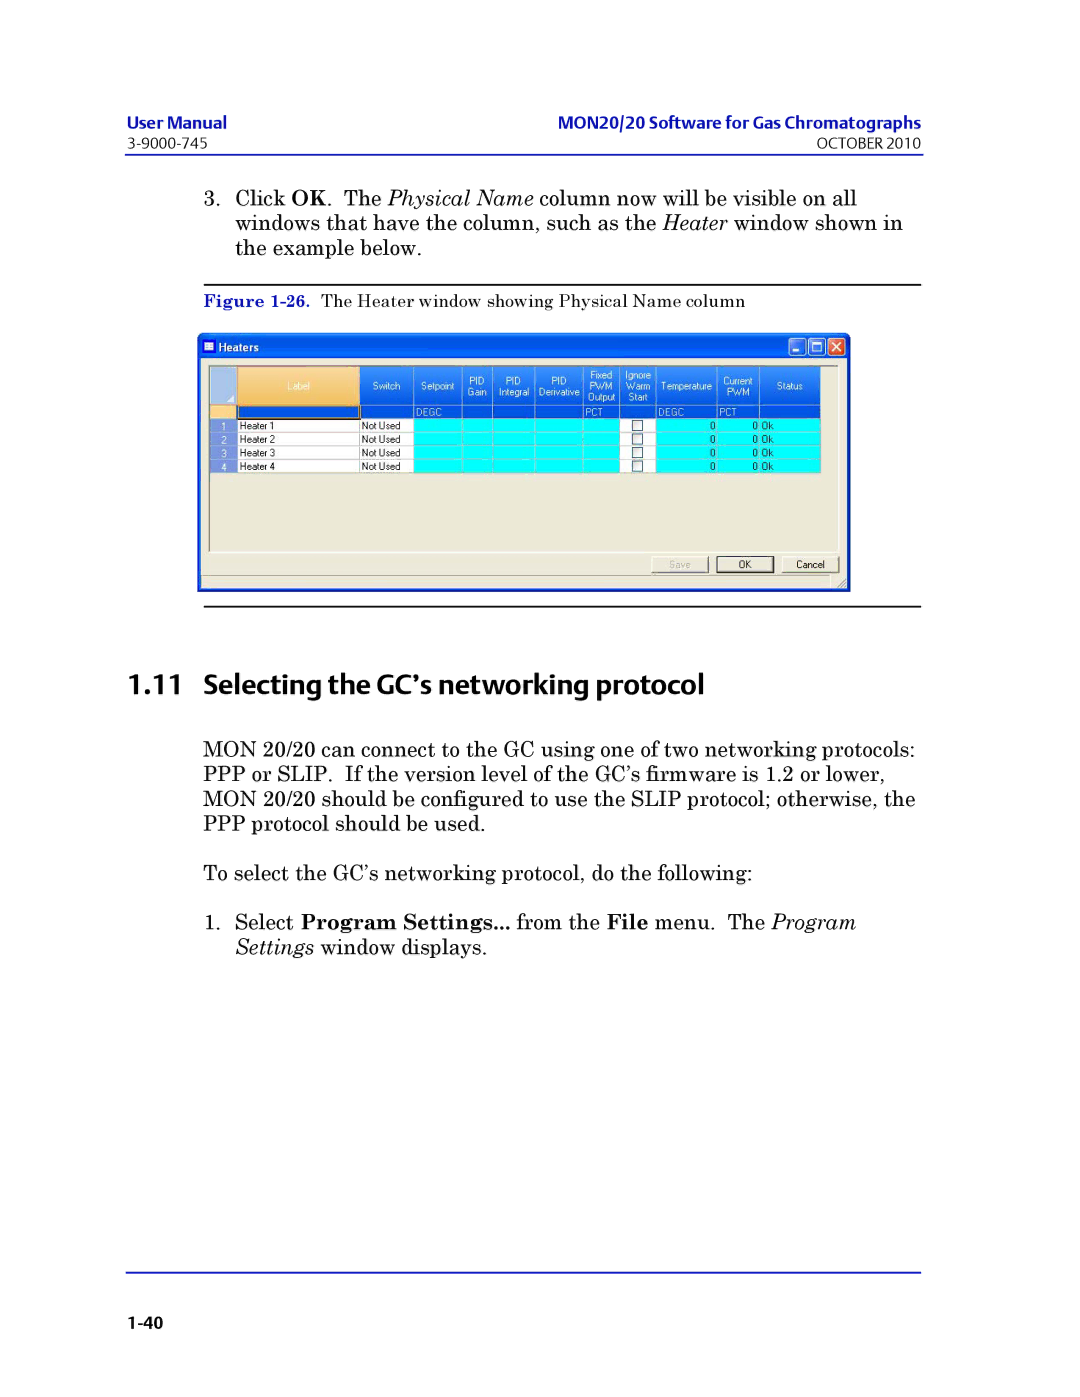 Emerson Process Management 3-9000-745 manual Selecting the GC’s networking protocol 